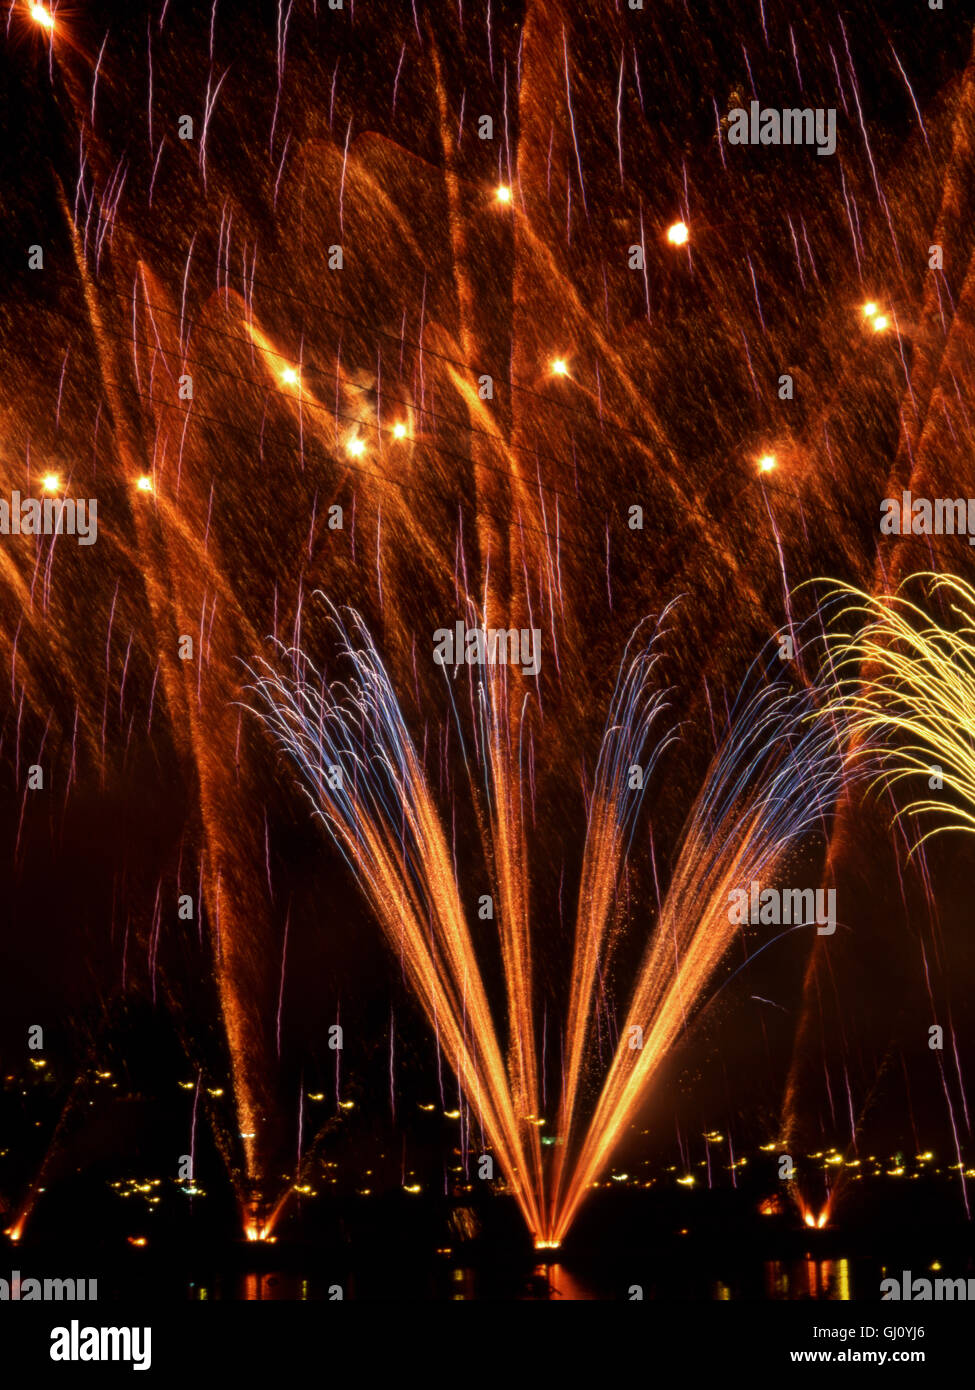 Fireworks display by Weco Pyrotechnische Fabrik from Germany. Stock Photo